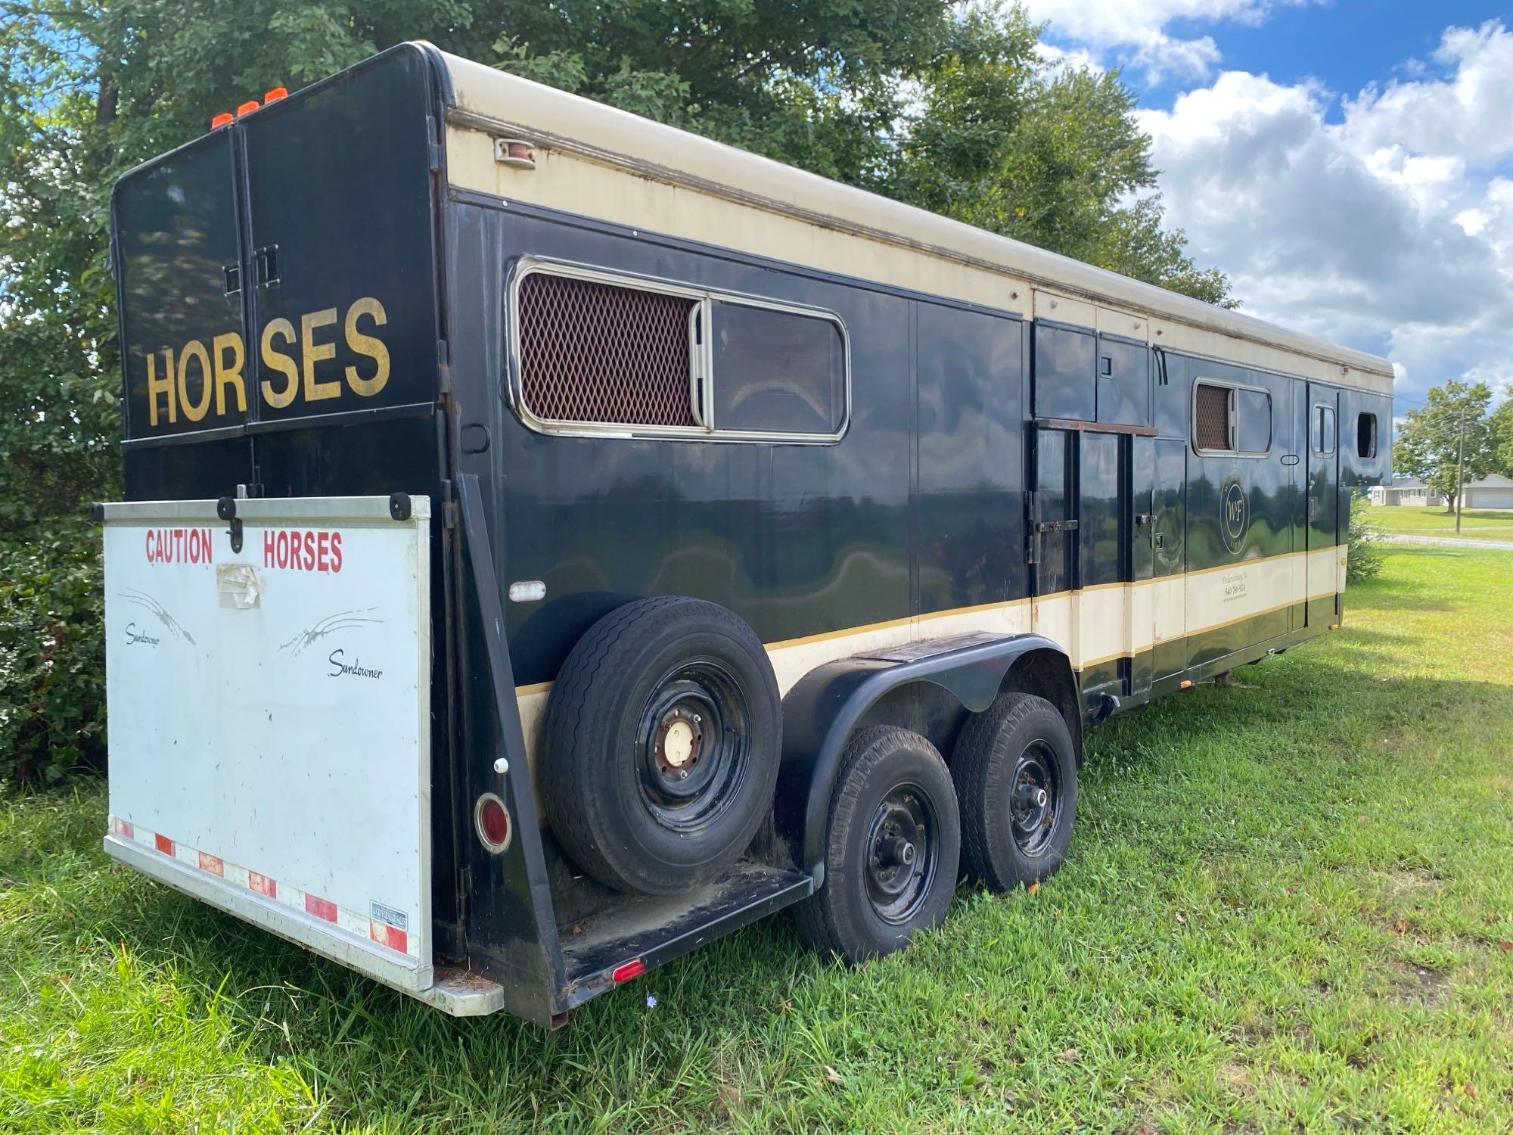 Image for Turnbow 4 Horse Trailer, Goose Neck Trailer, W Tack Room, Per Seller Used Until Brought To Auction Site 